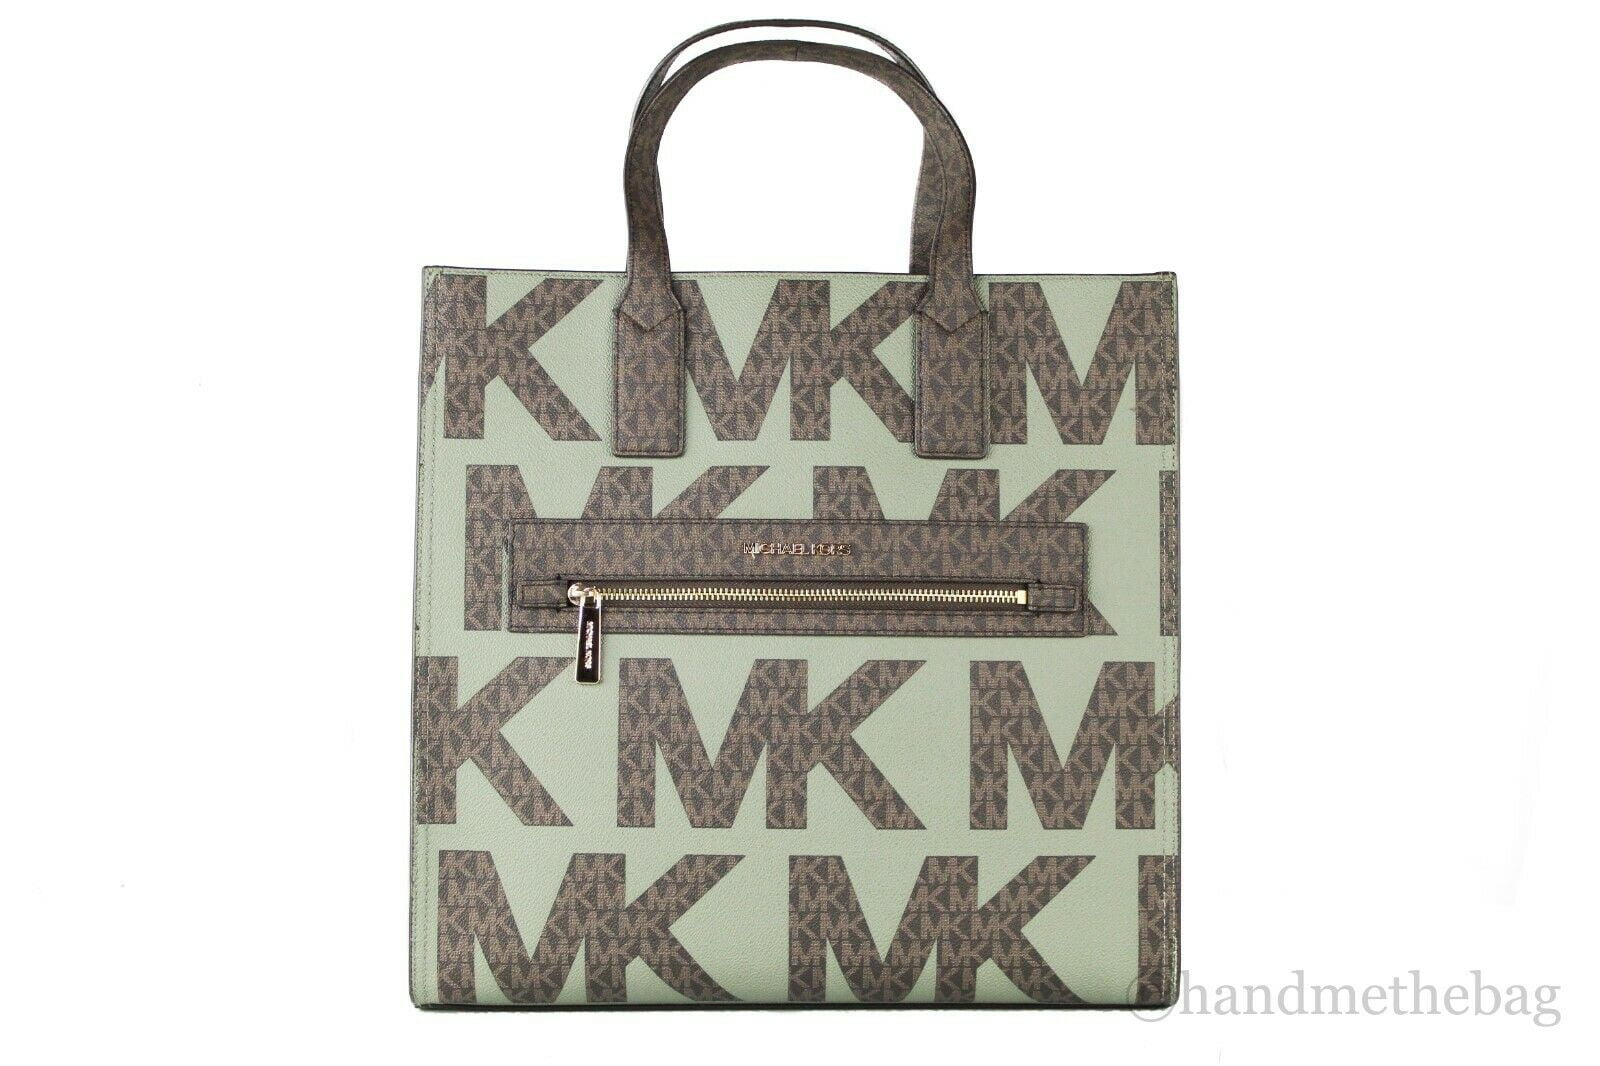 Michael kors kenly large ns tote satchel graphic logo brown mk army green  multi